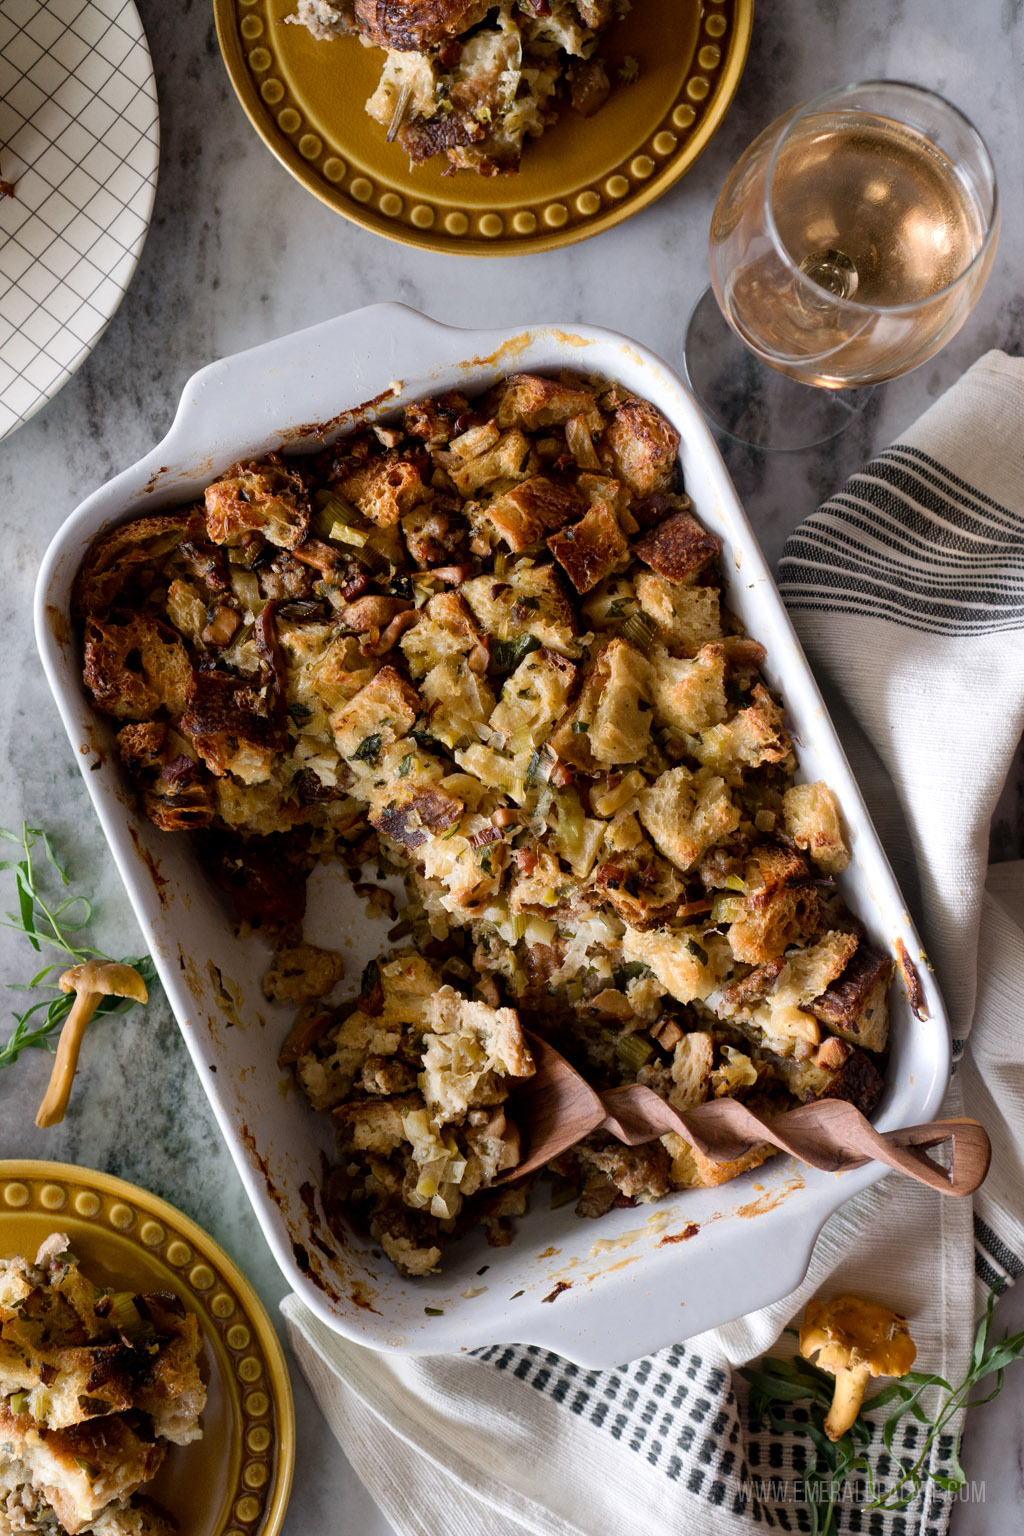 baked dish of Thanksgiving stuffing with sausage